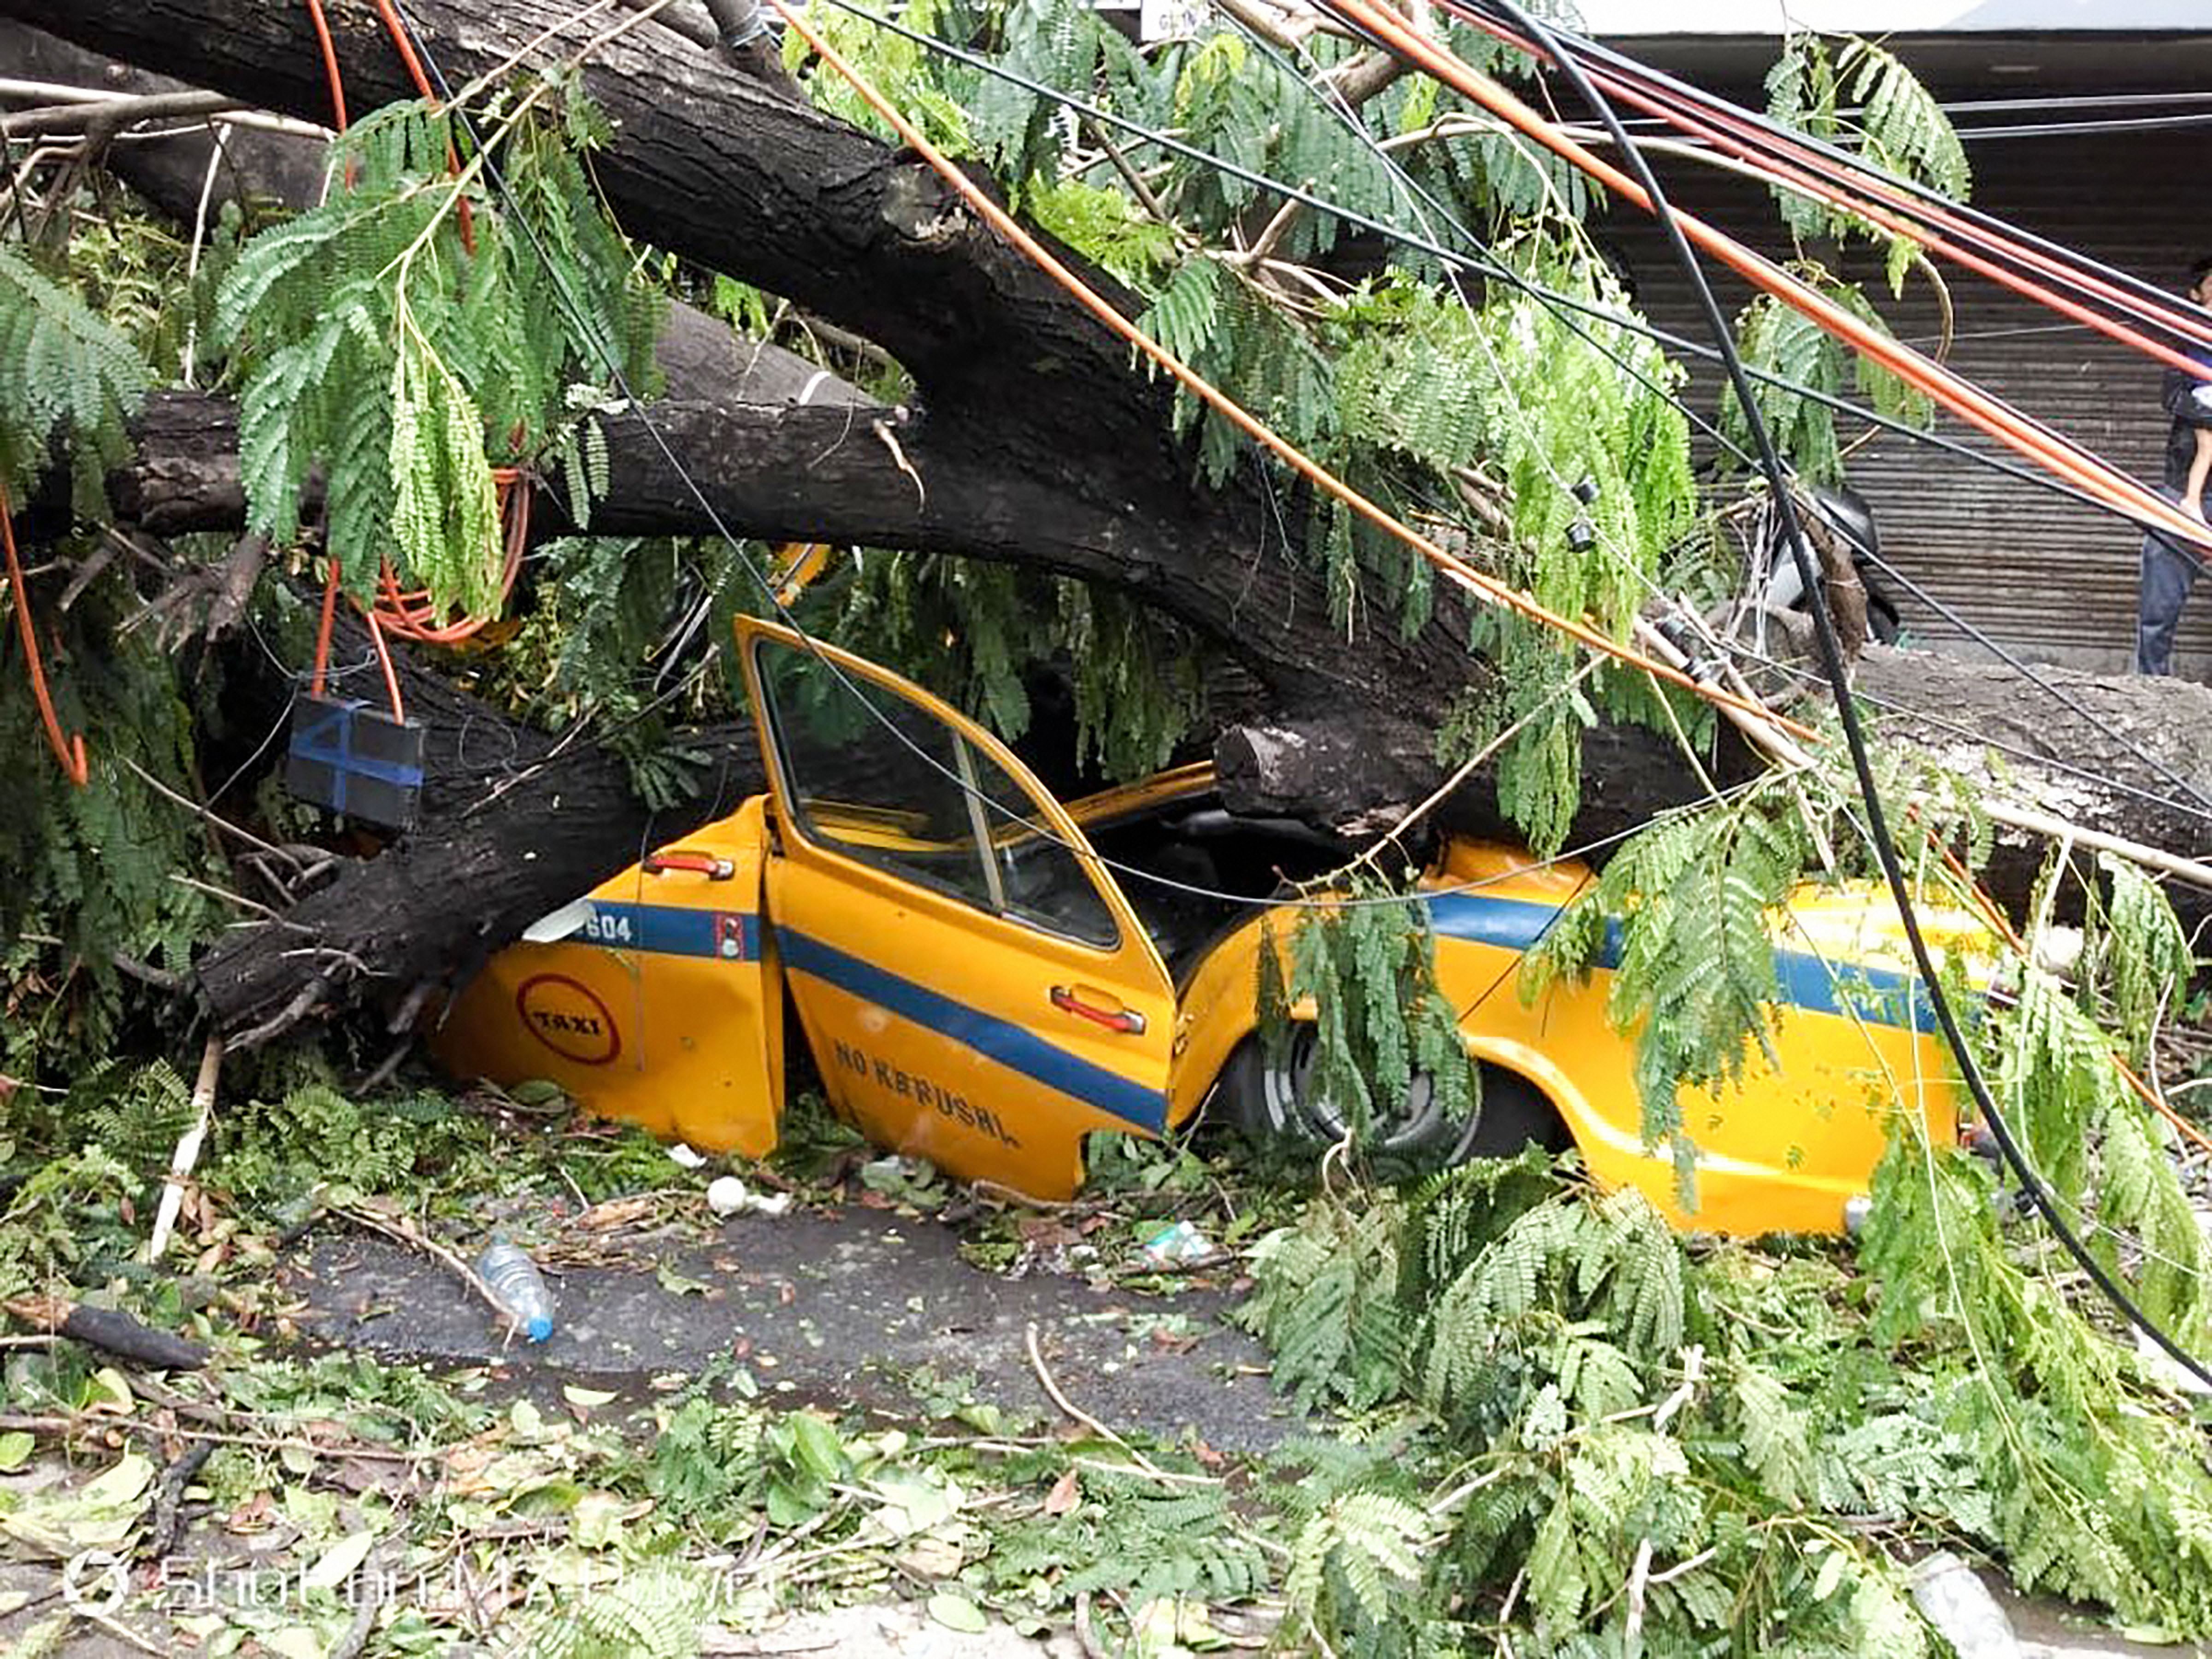 Mangled remains of a taxi after a tree fell on it during Cyclone Amphan at Dharamtala in Calcutta.